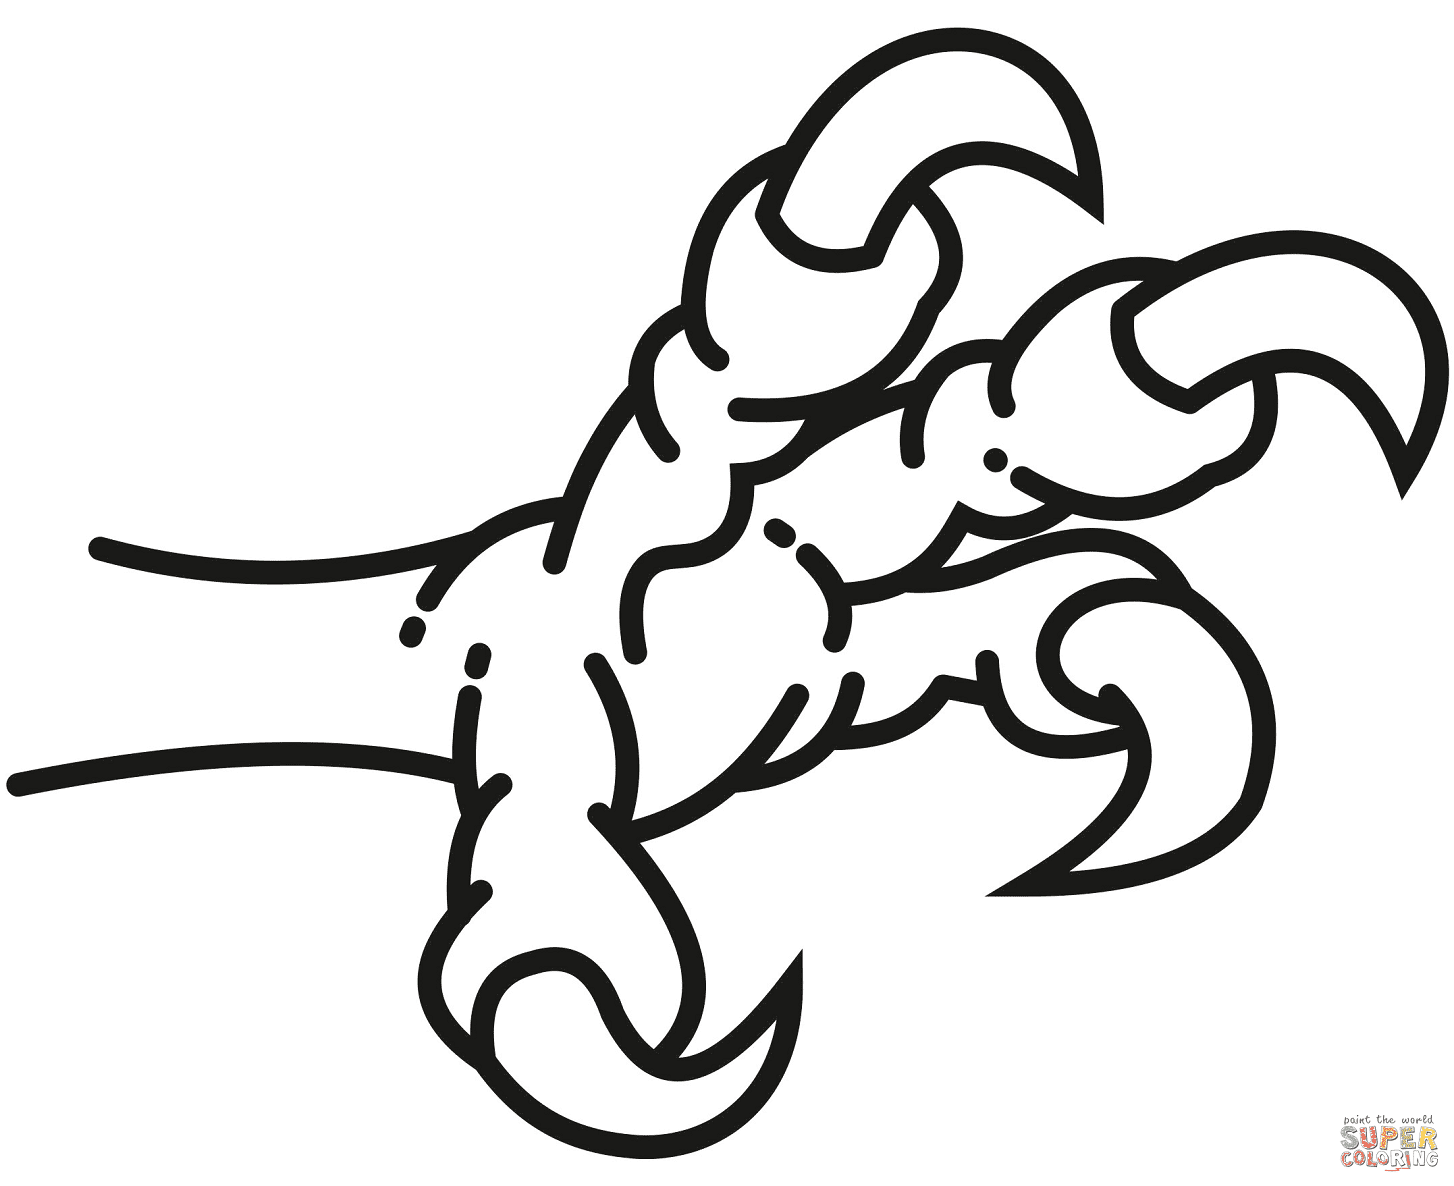 Eagle Claws Coloring Page